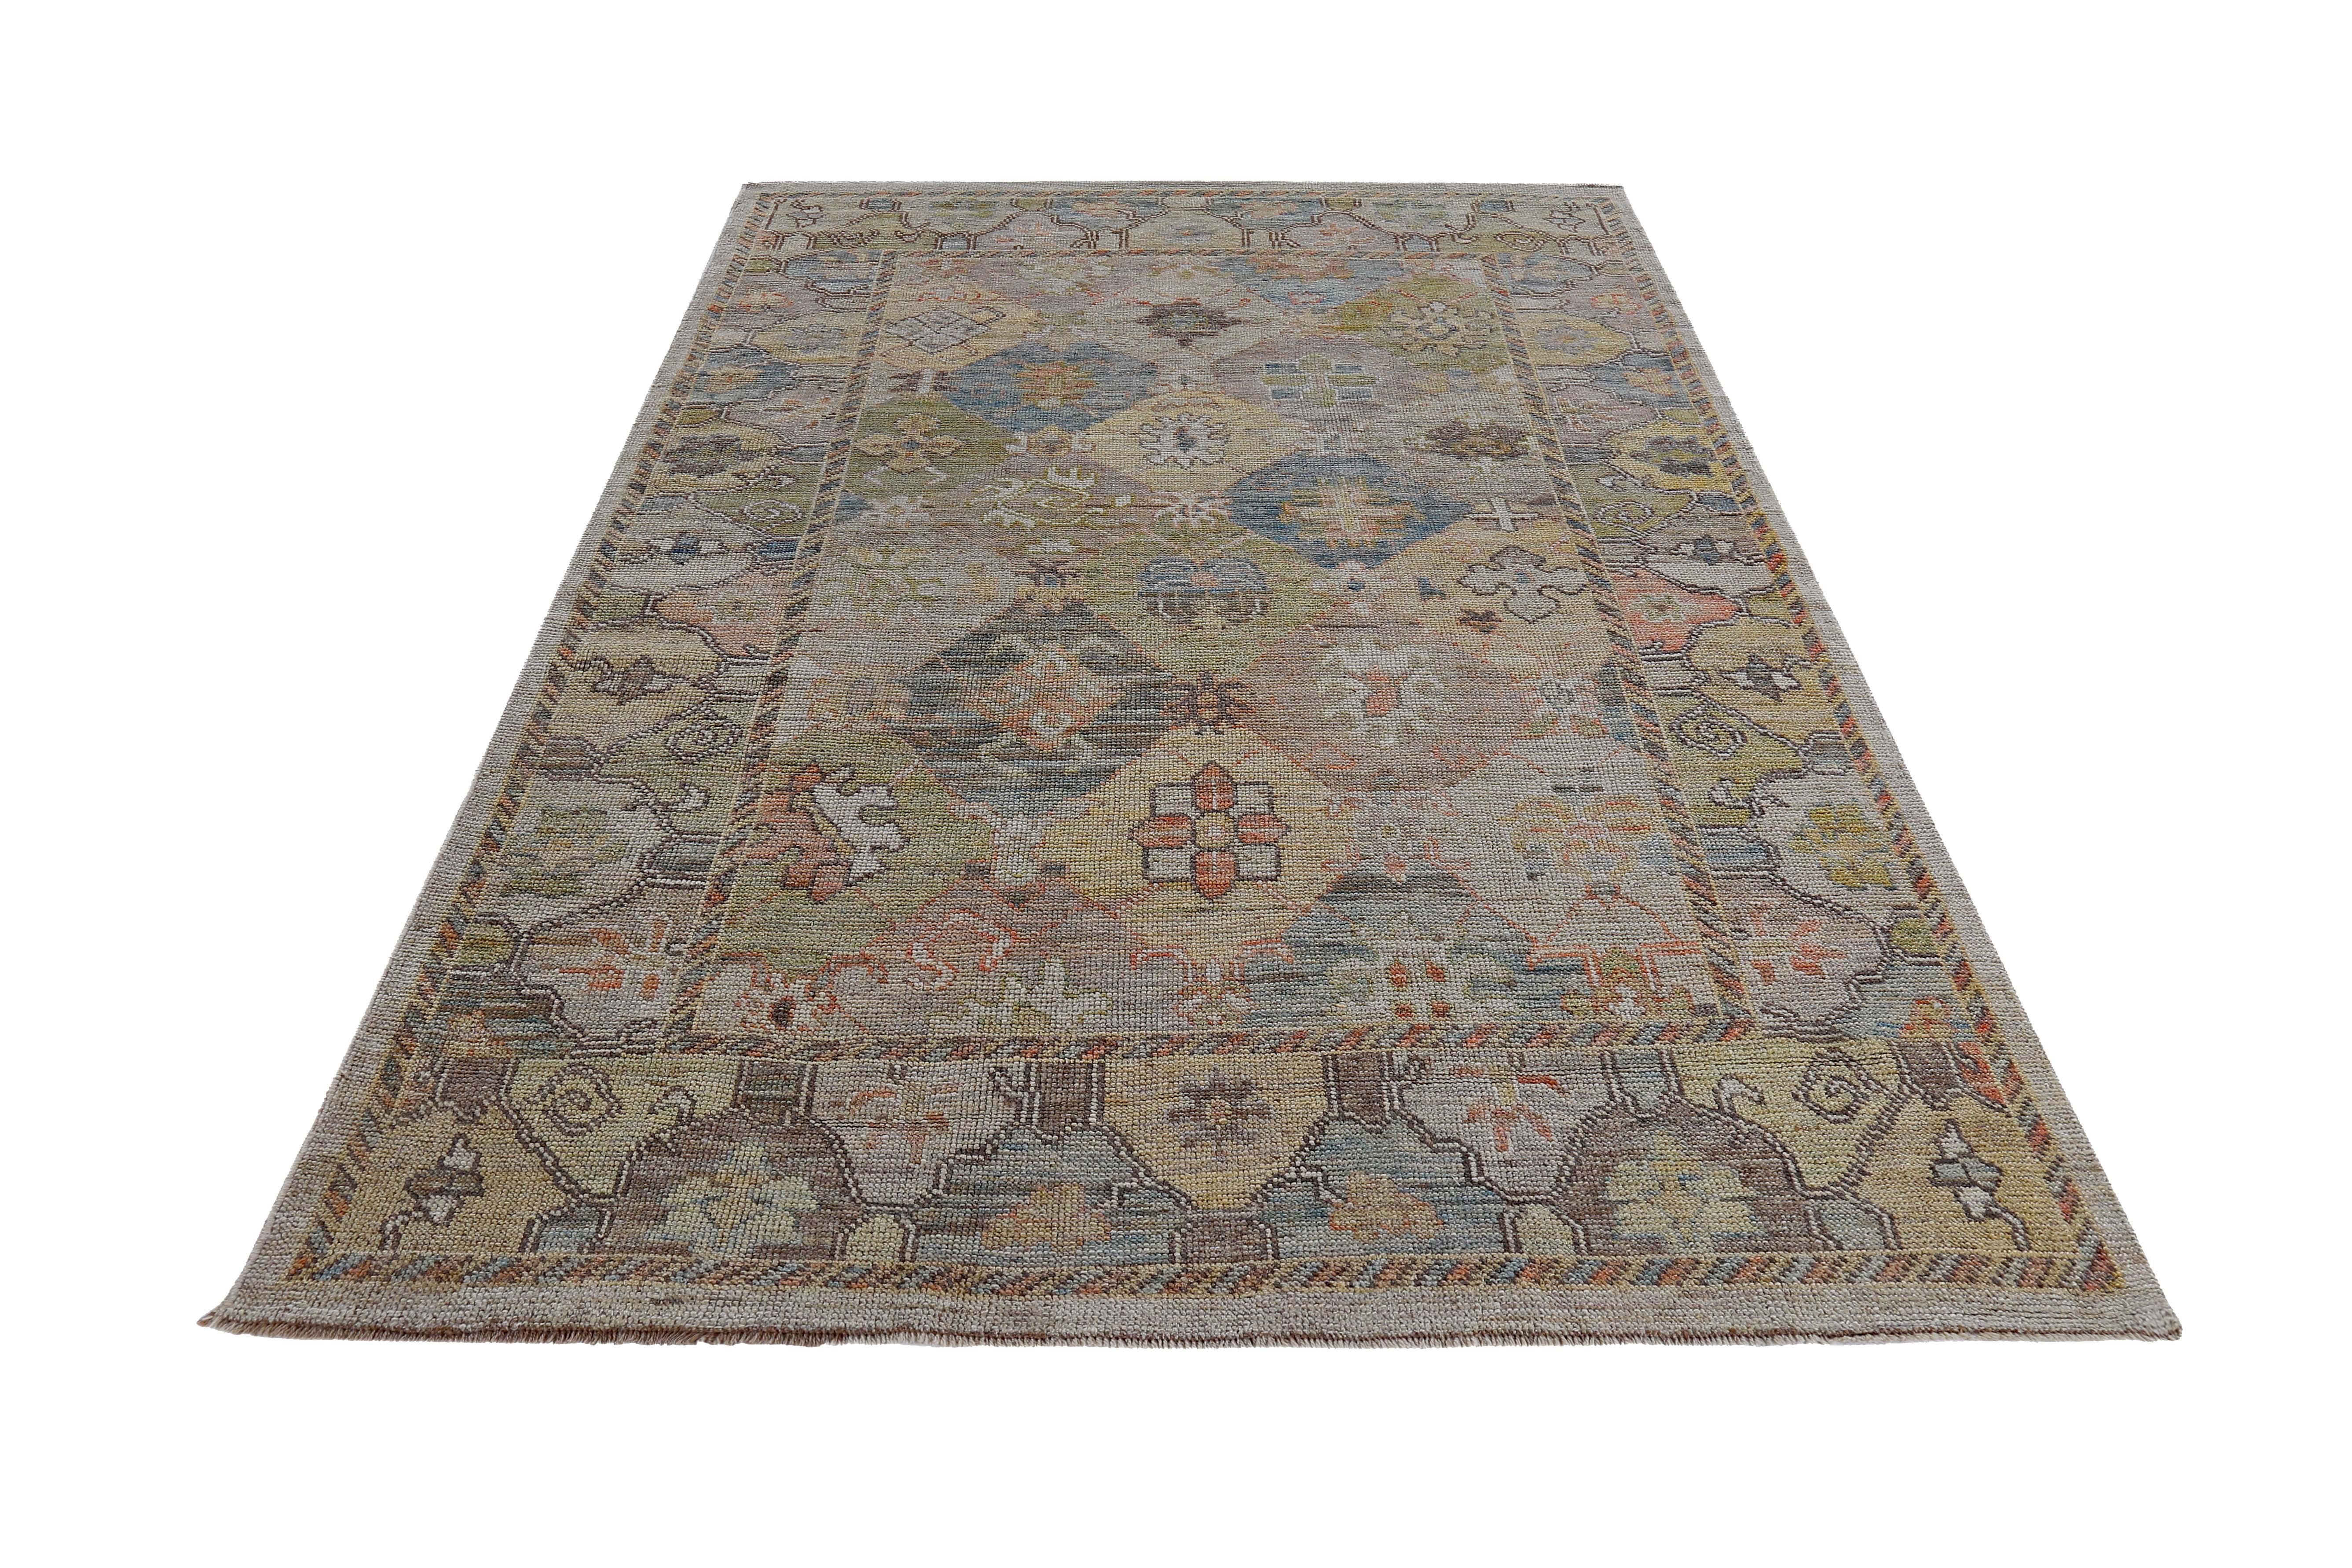 New Turkish rug made of handwoven sheep’s wool of the finest quality. It’s colored with organic vegetable dyes that are certified safe for humans and pets alike. It features floral details in yellow, blue and green over a beige field. Flower